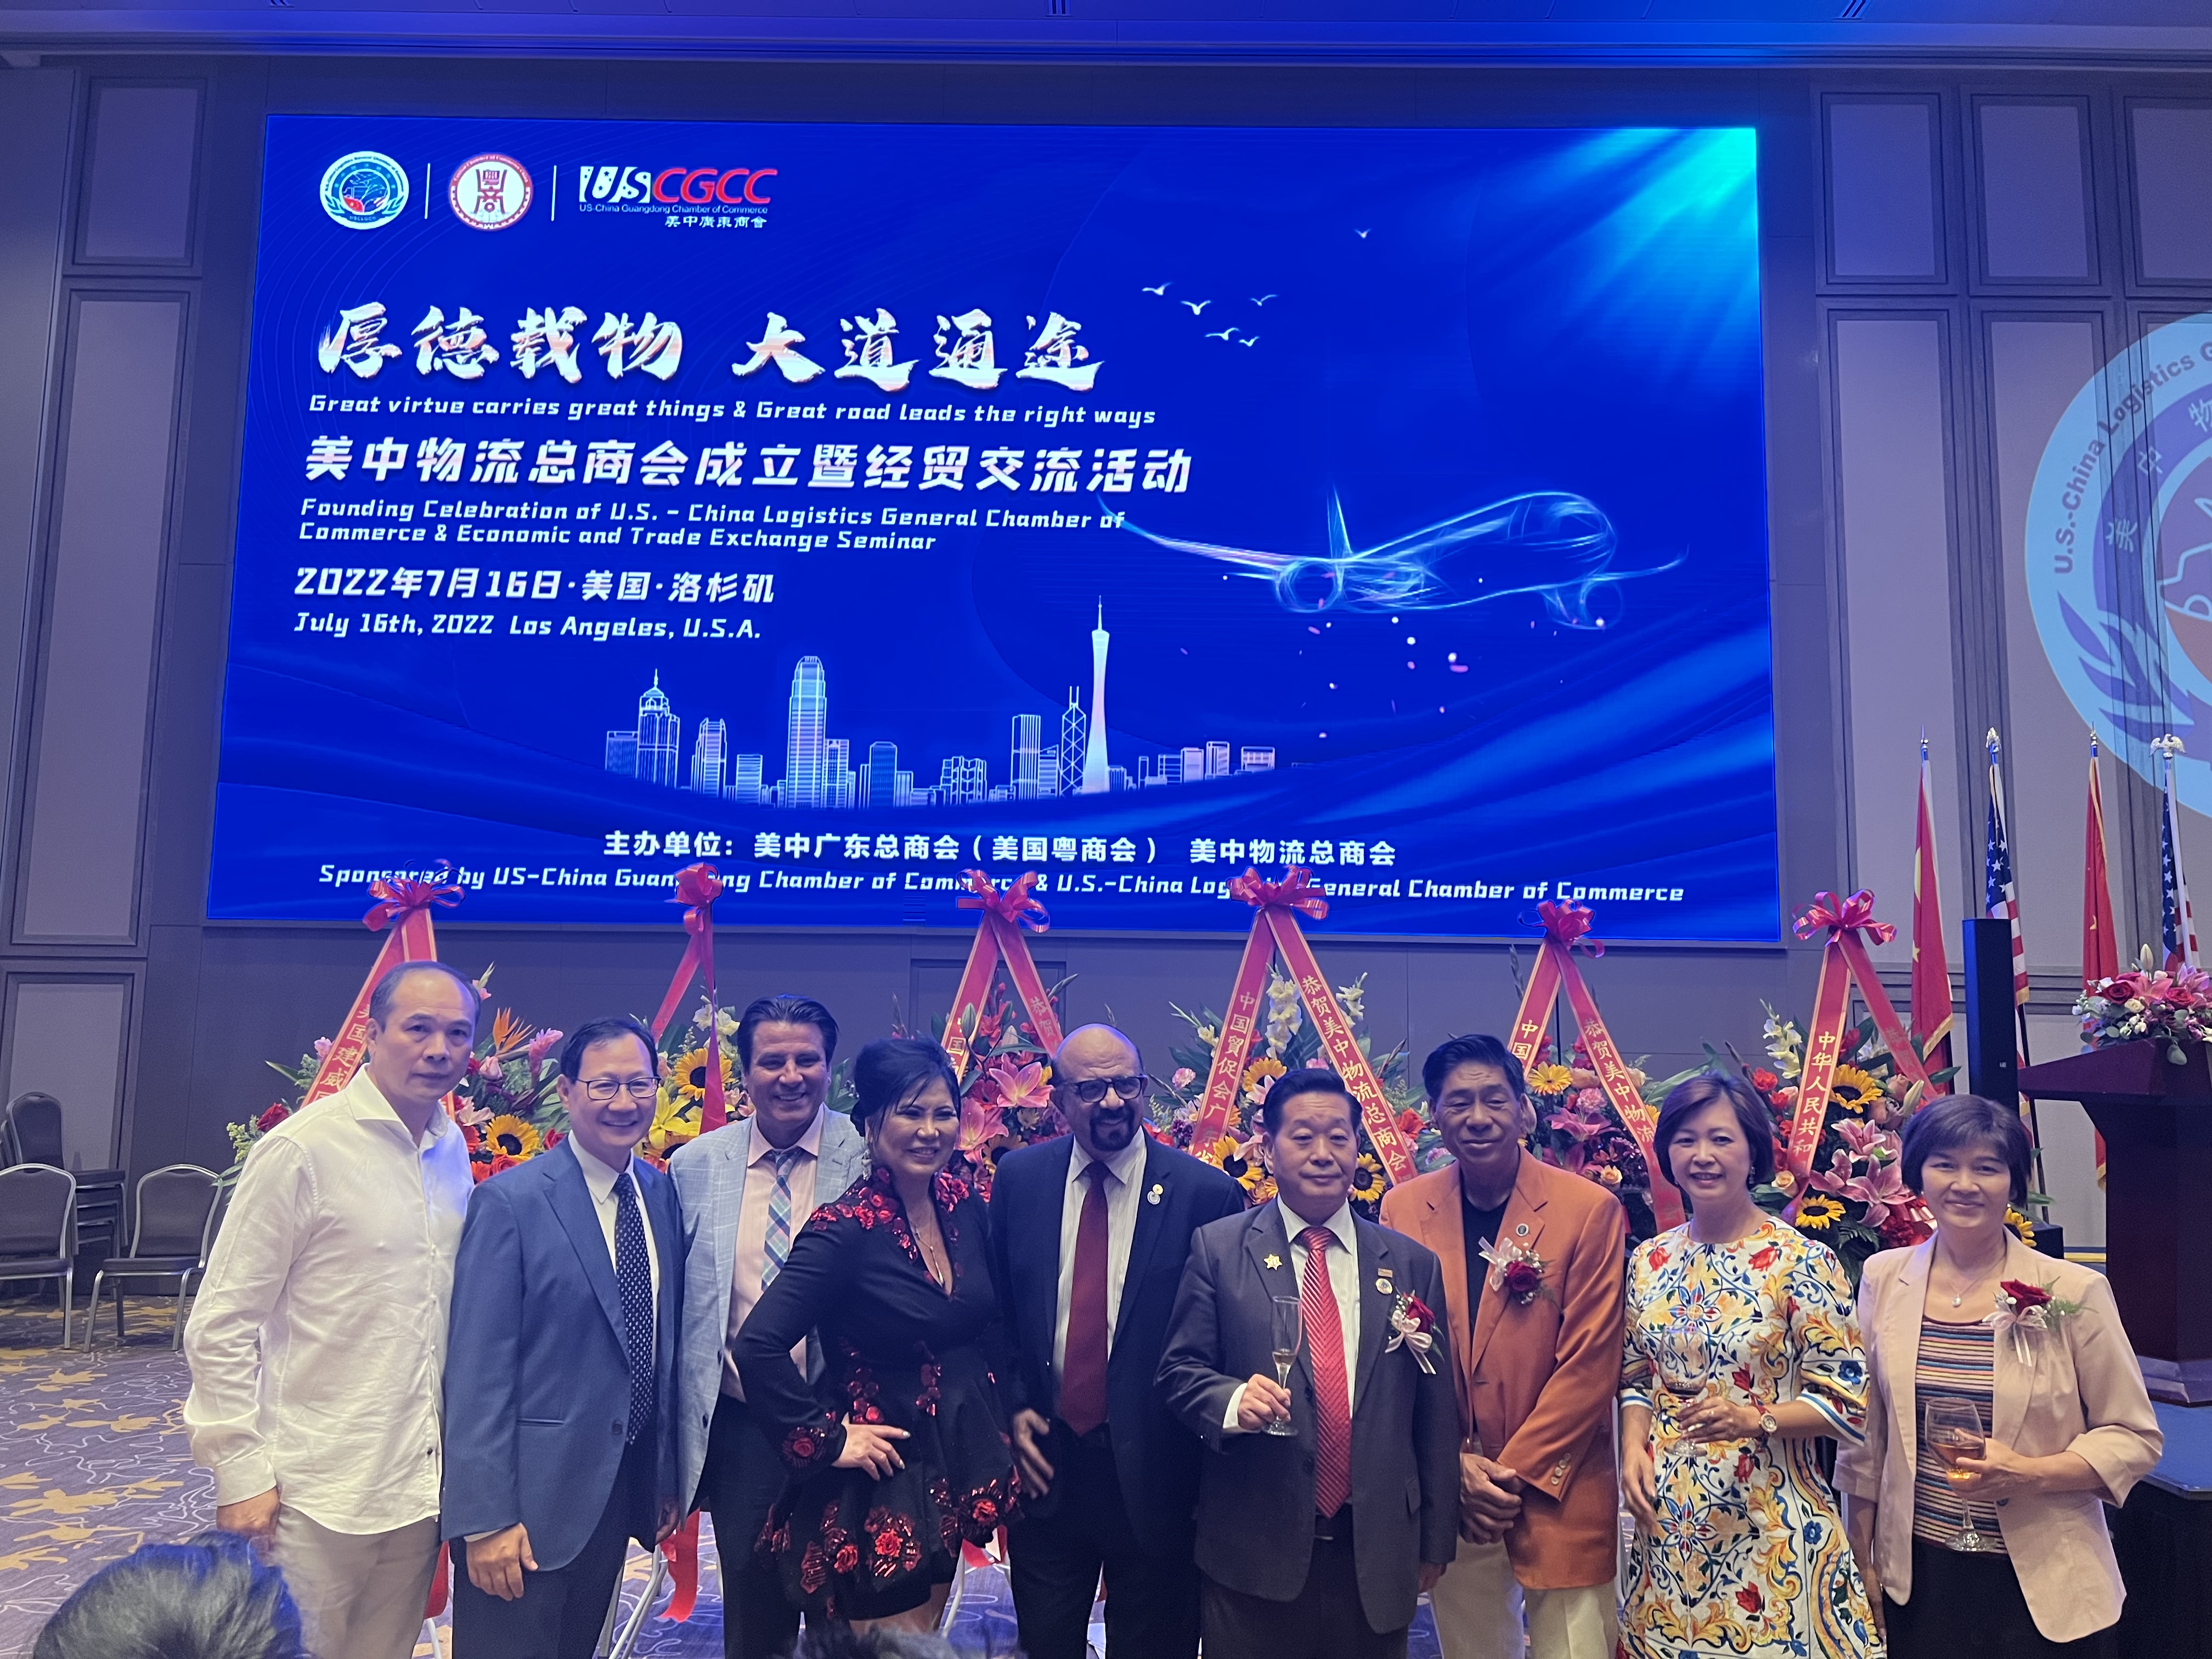 The establishment of U.S.- China Logistics General Chamber of Commerce and Economic and Trade Exchange Event